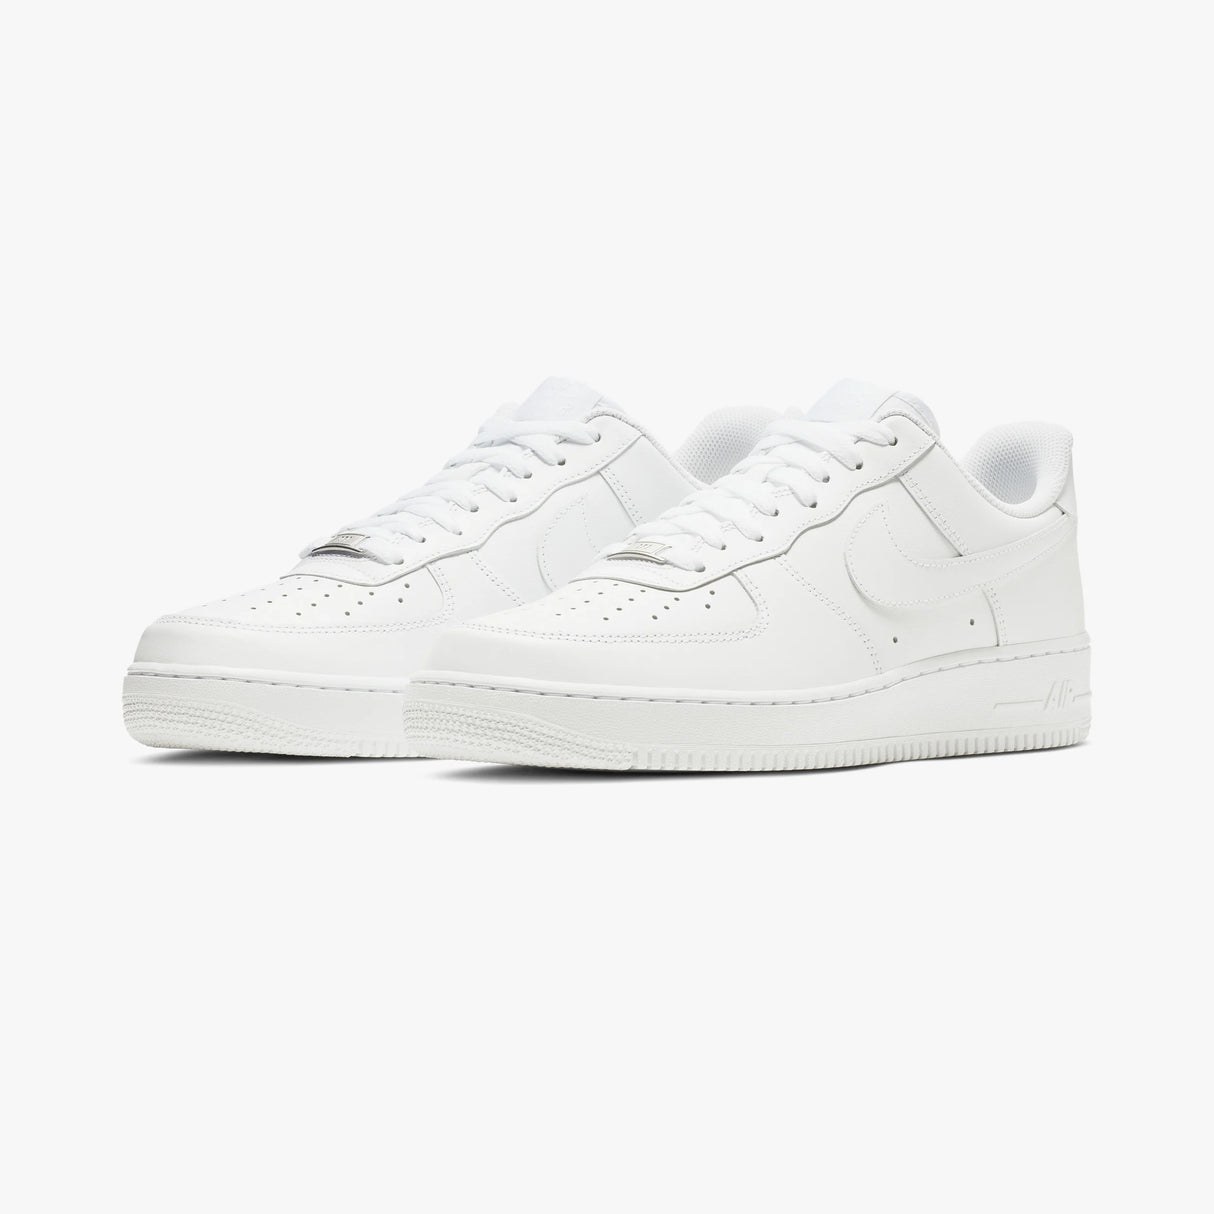 Nike Air Force 1 '07 Shoes in White [CW2288-111]